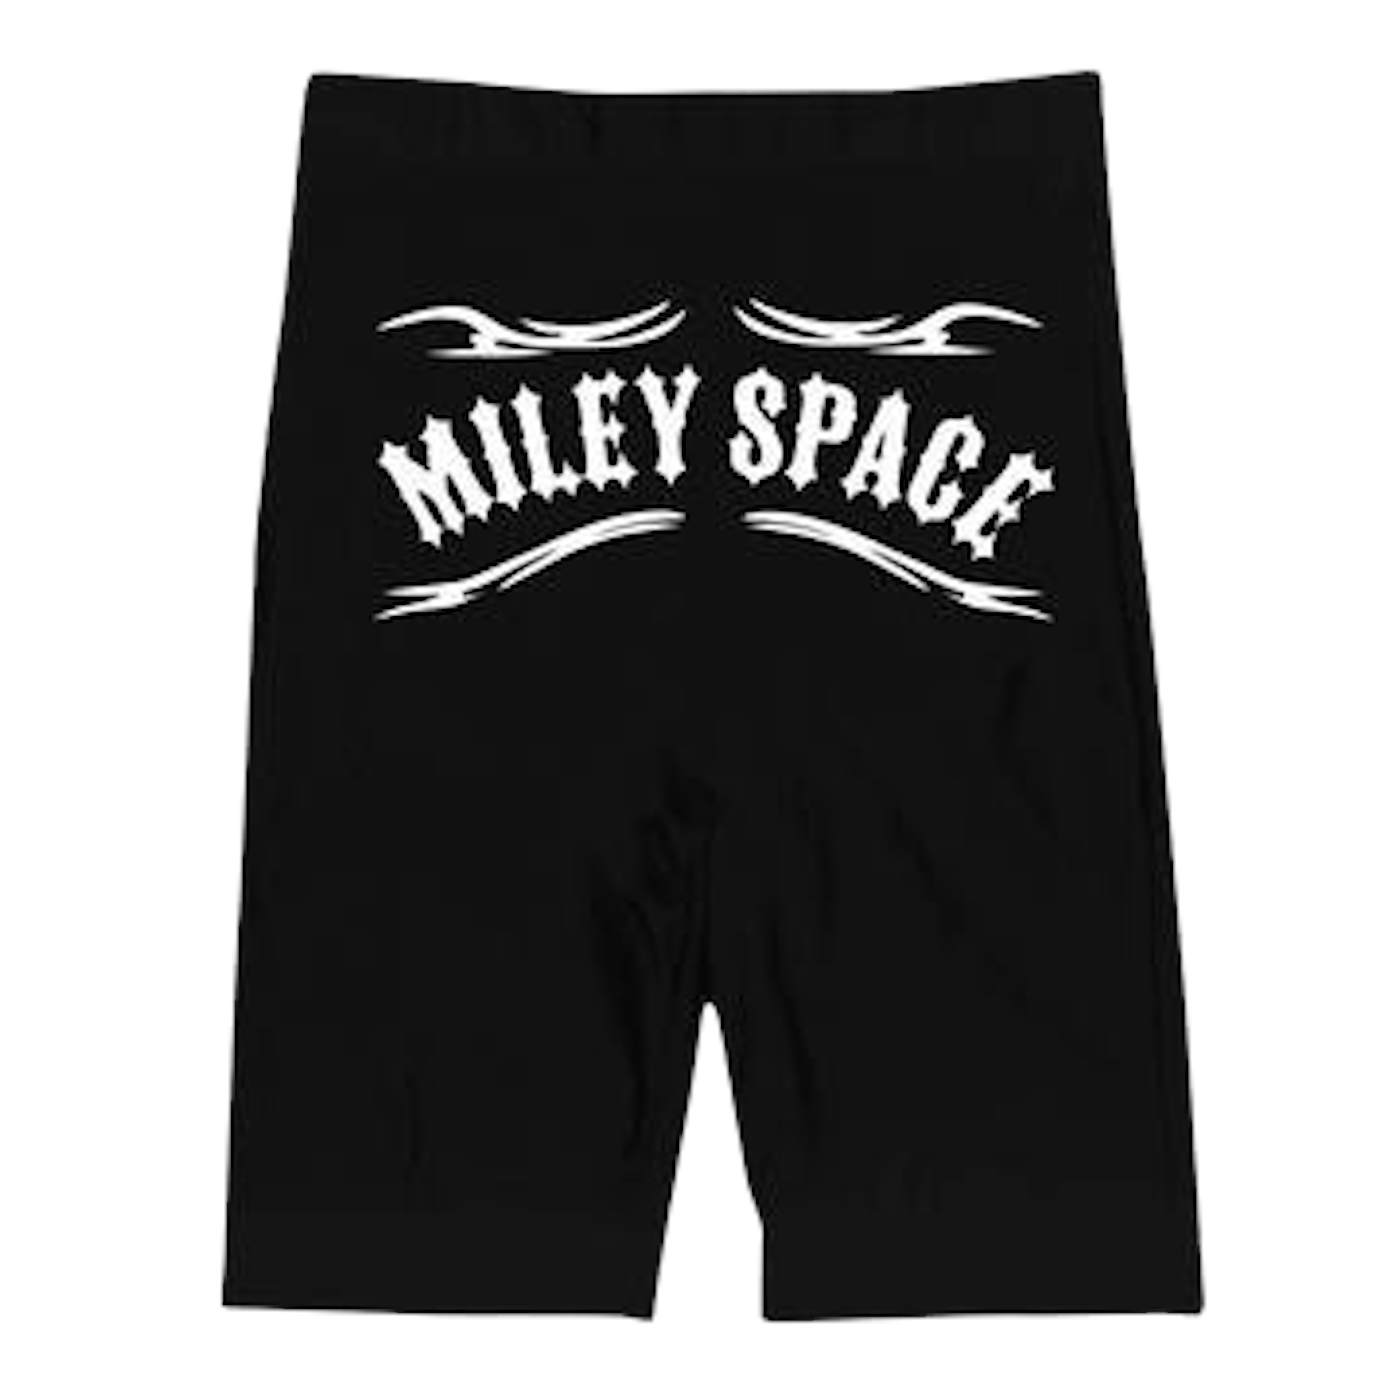 Miley Cyrus Miley Space Shorts